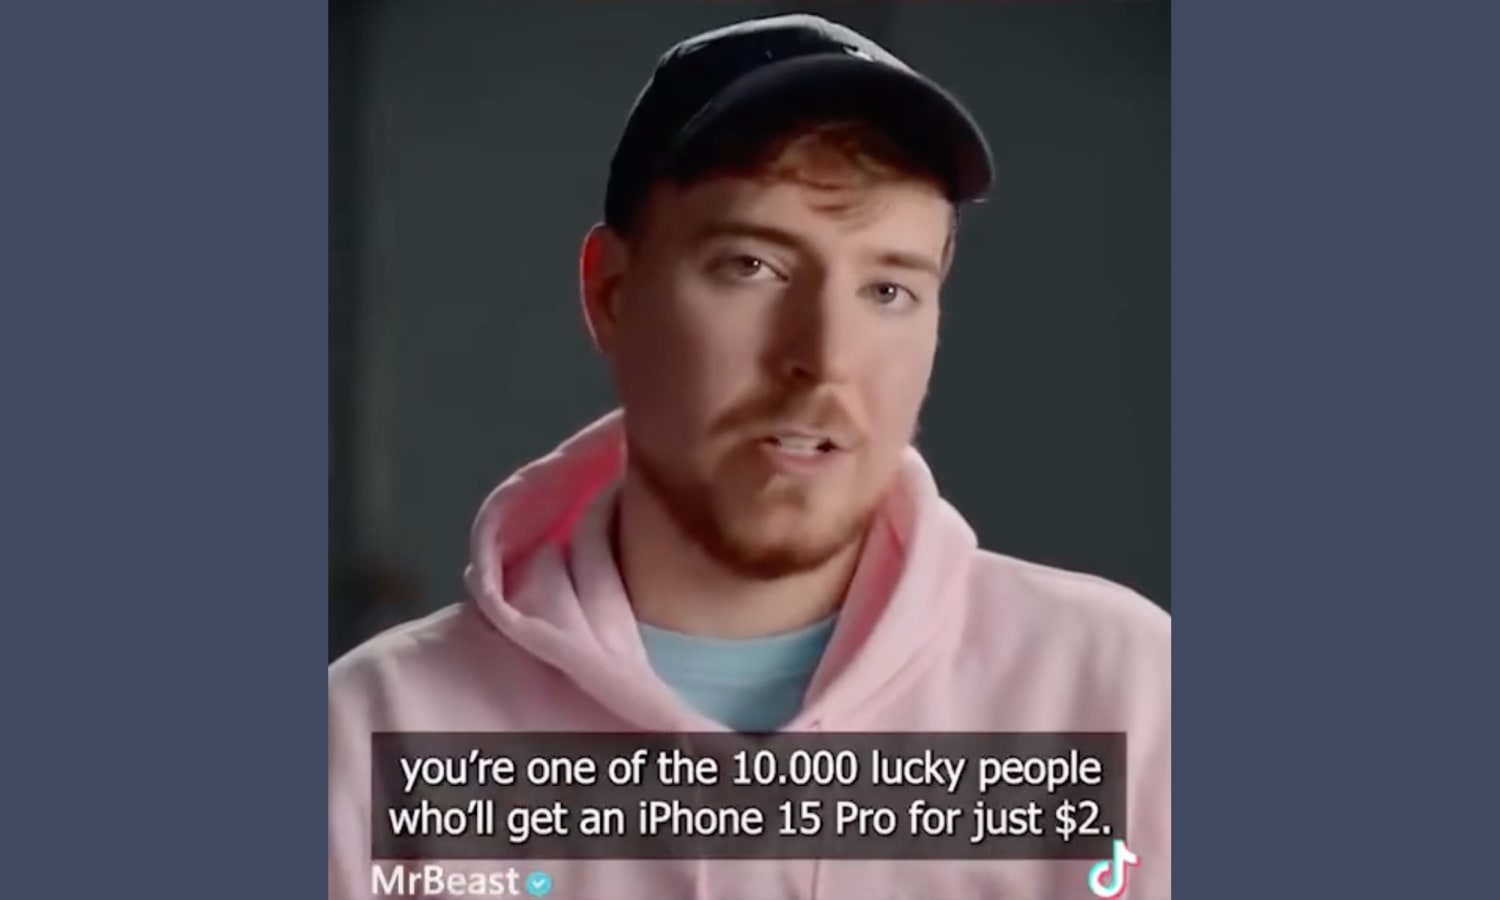 Who is MrBeast & why does he keep appearing on our Instagram